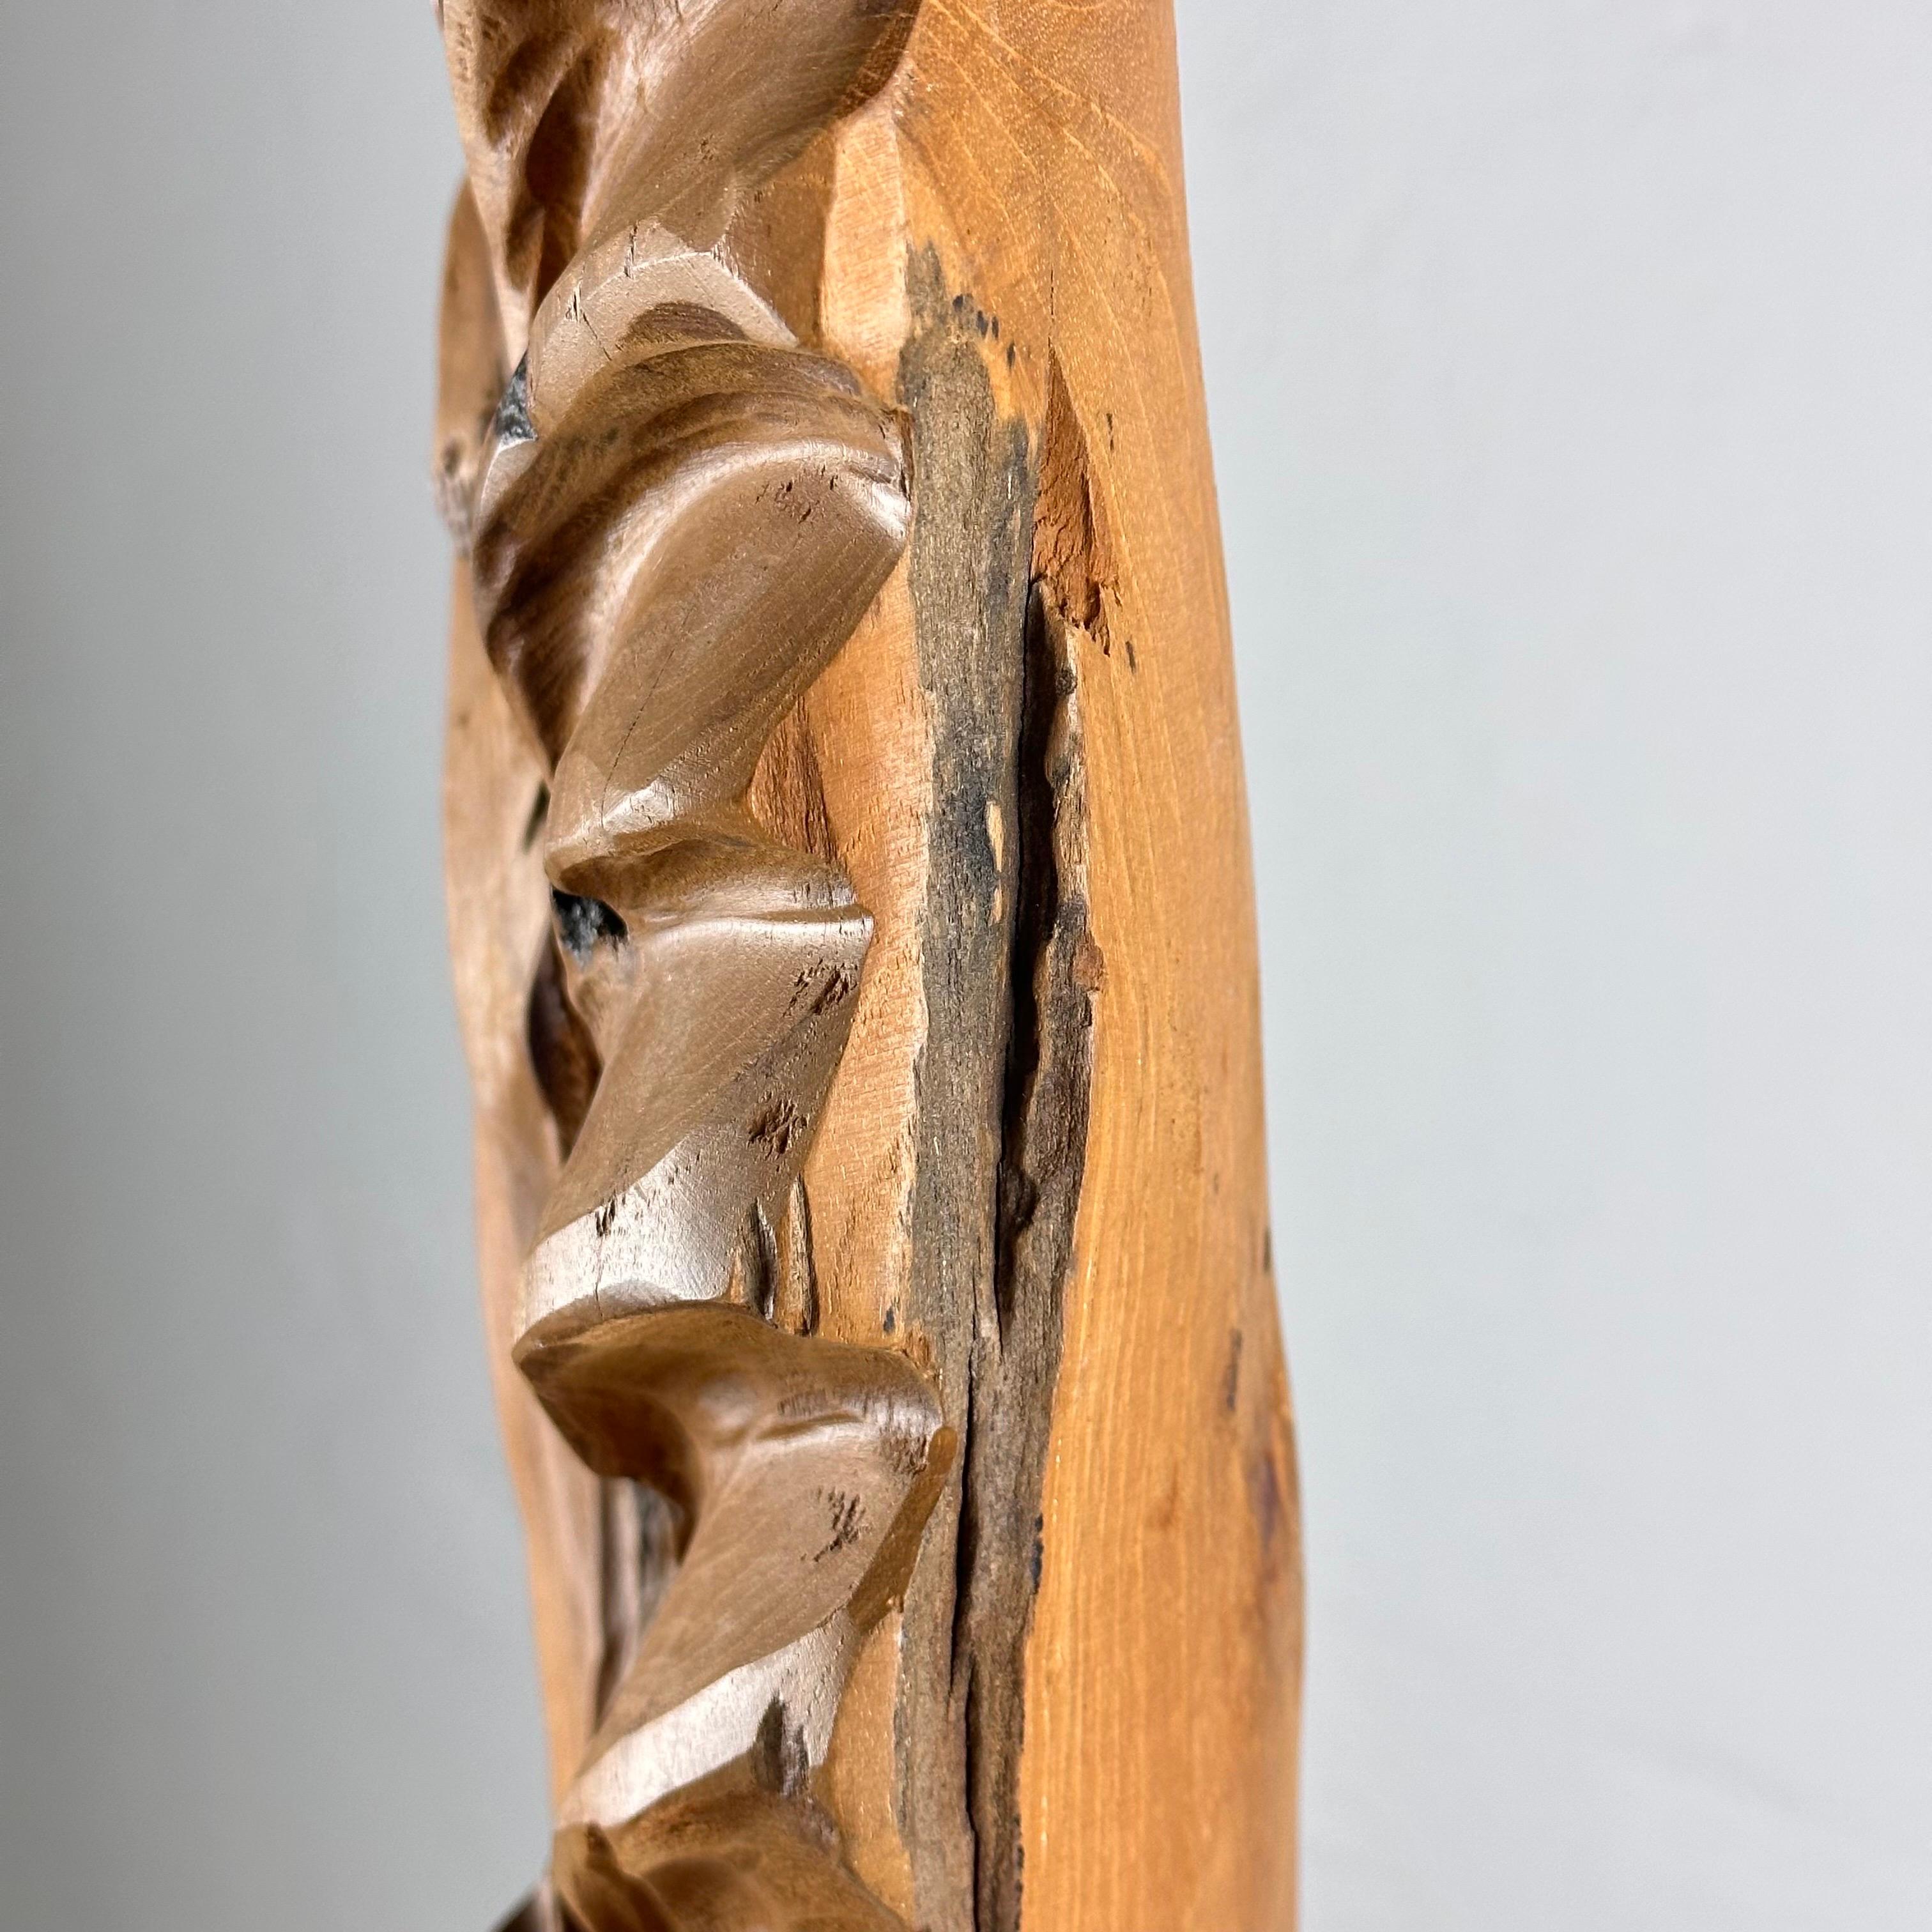 Exquisite Italian Phytomorphic Abstract Sculpture in Natural Ash, 1960s For Sale 13